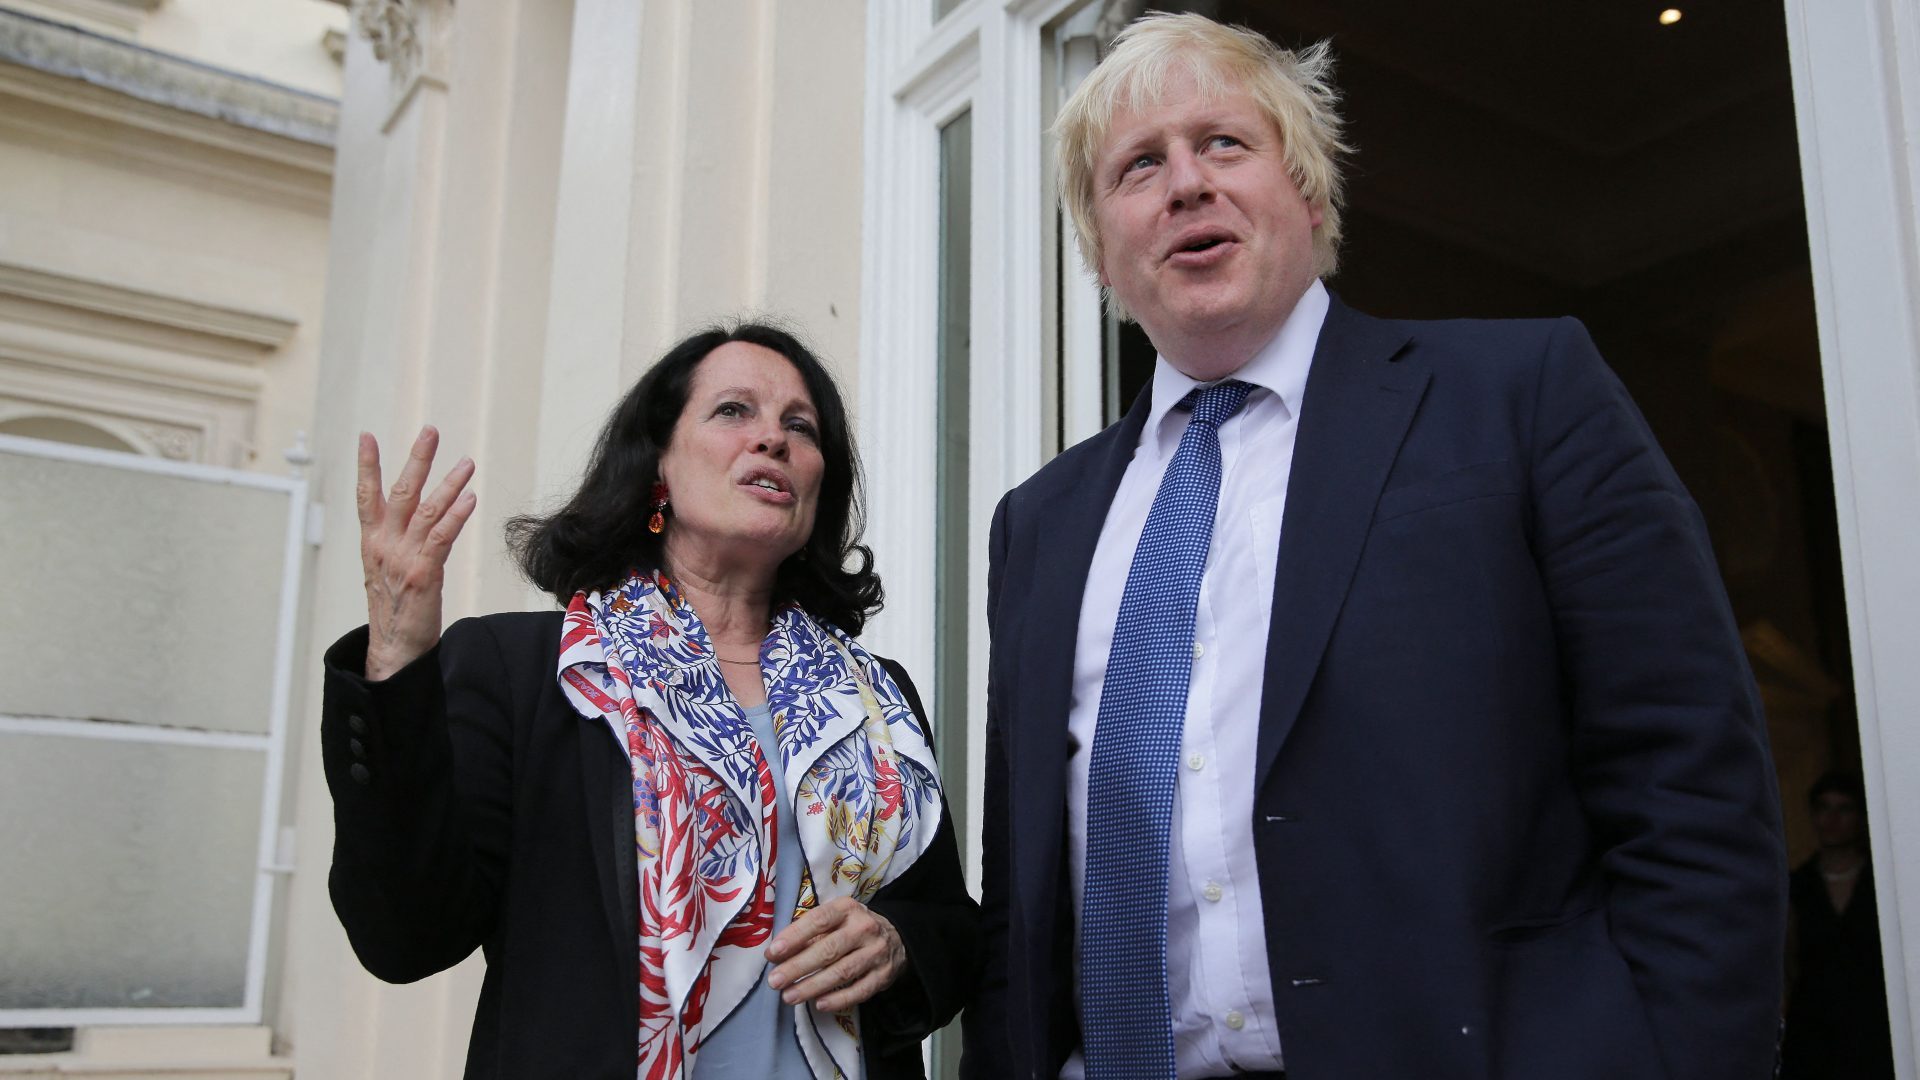 Then foreign secretary Boris Johnson talks with France's then ambassador to Britain, Sylvie Bermann, at a reception in 2016 (Photo by DANIEL LEAL/AFP via Getty Images)